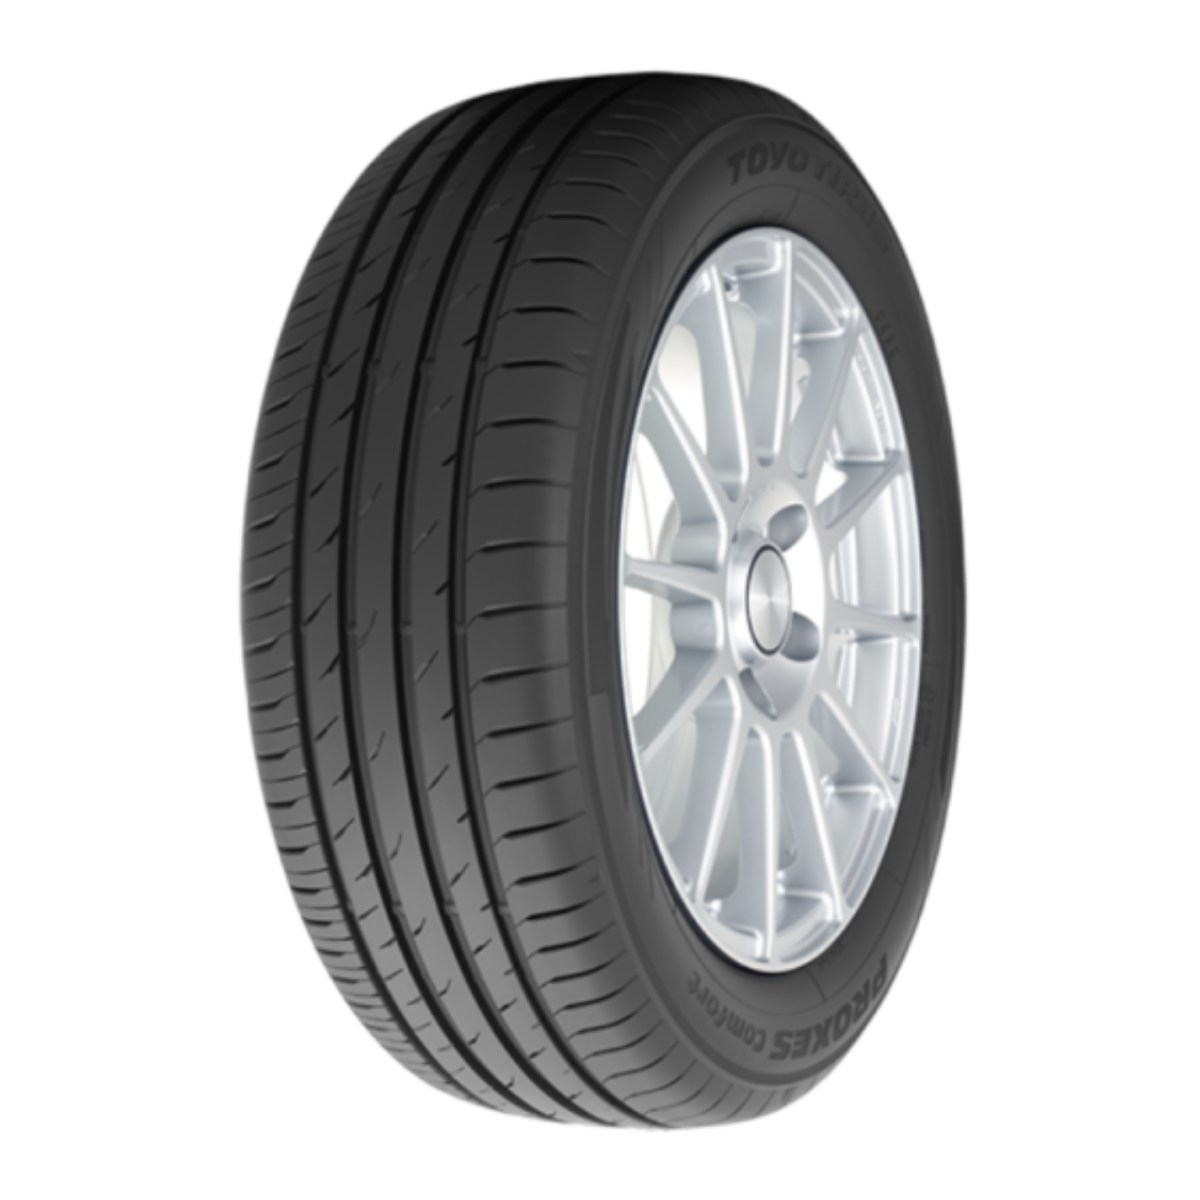 185/65/R15 Toyo Proxes Comfort 92H